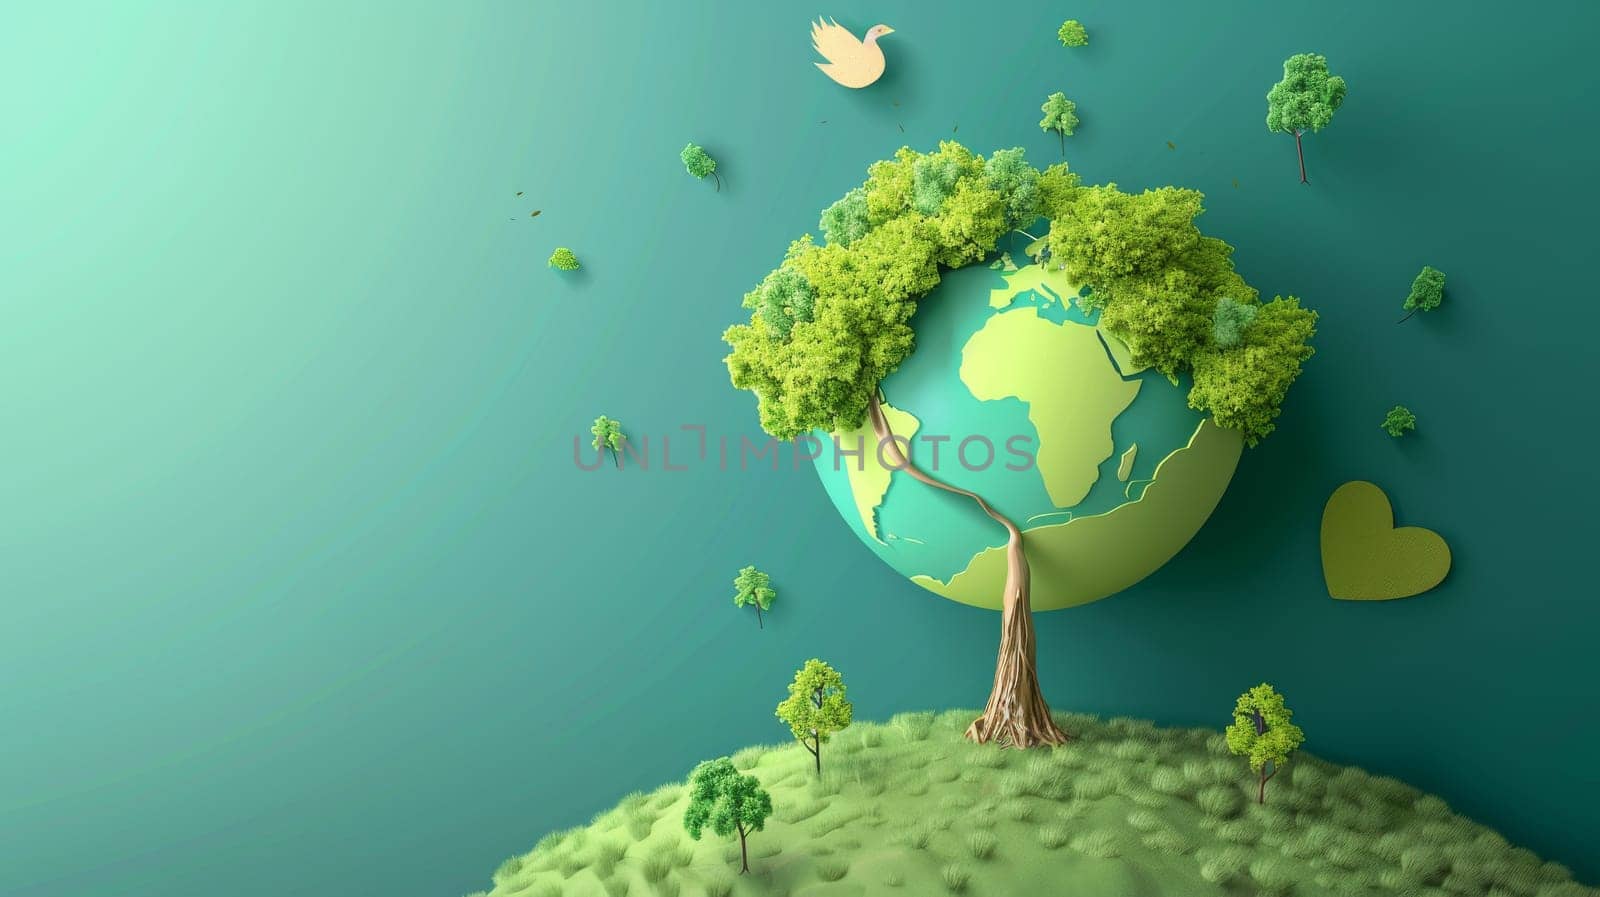 Modern background image for World Environment Day. Save the Earth, Globe, Heart, Tree. Eco-friendly illustration for web, banner, campaign, social media.